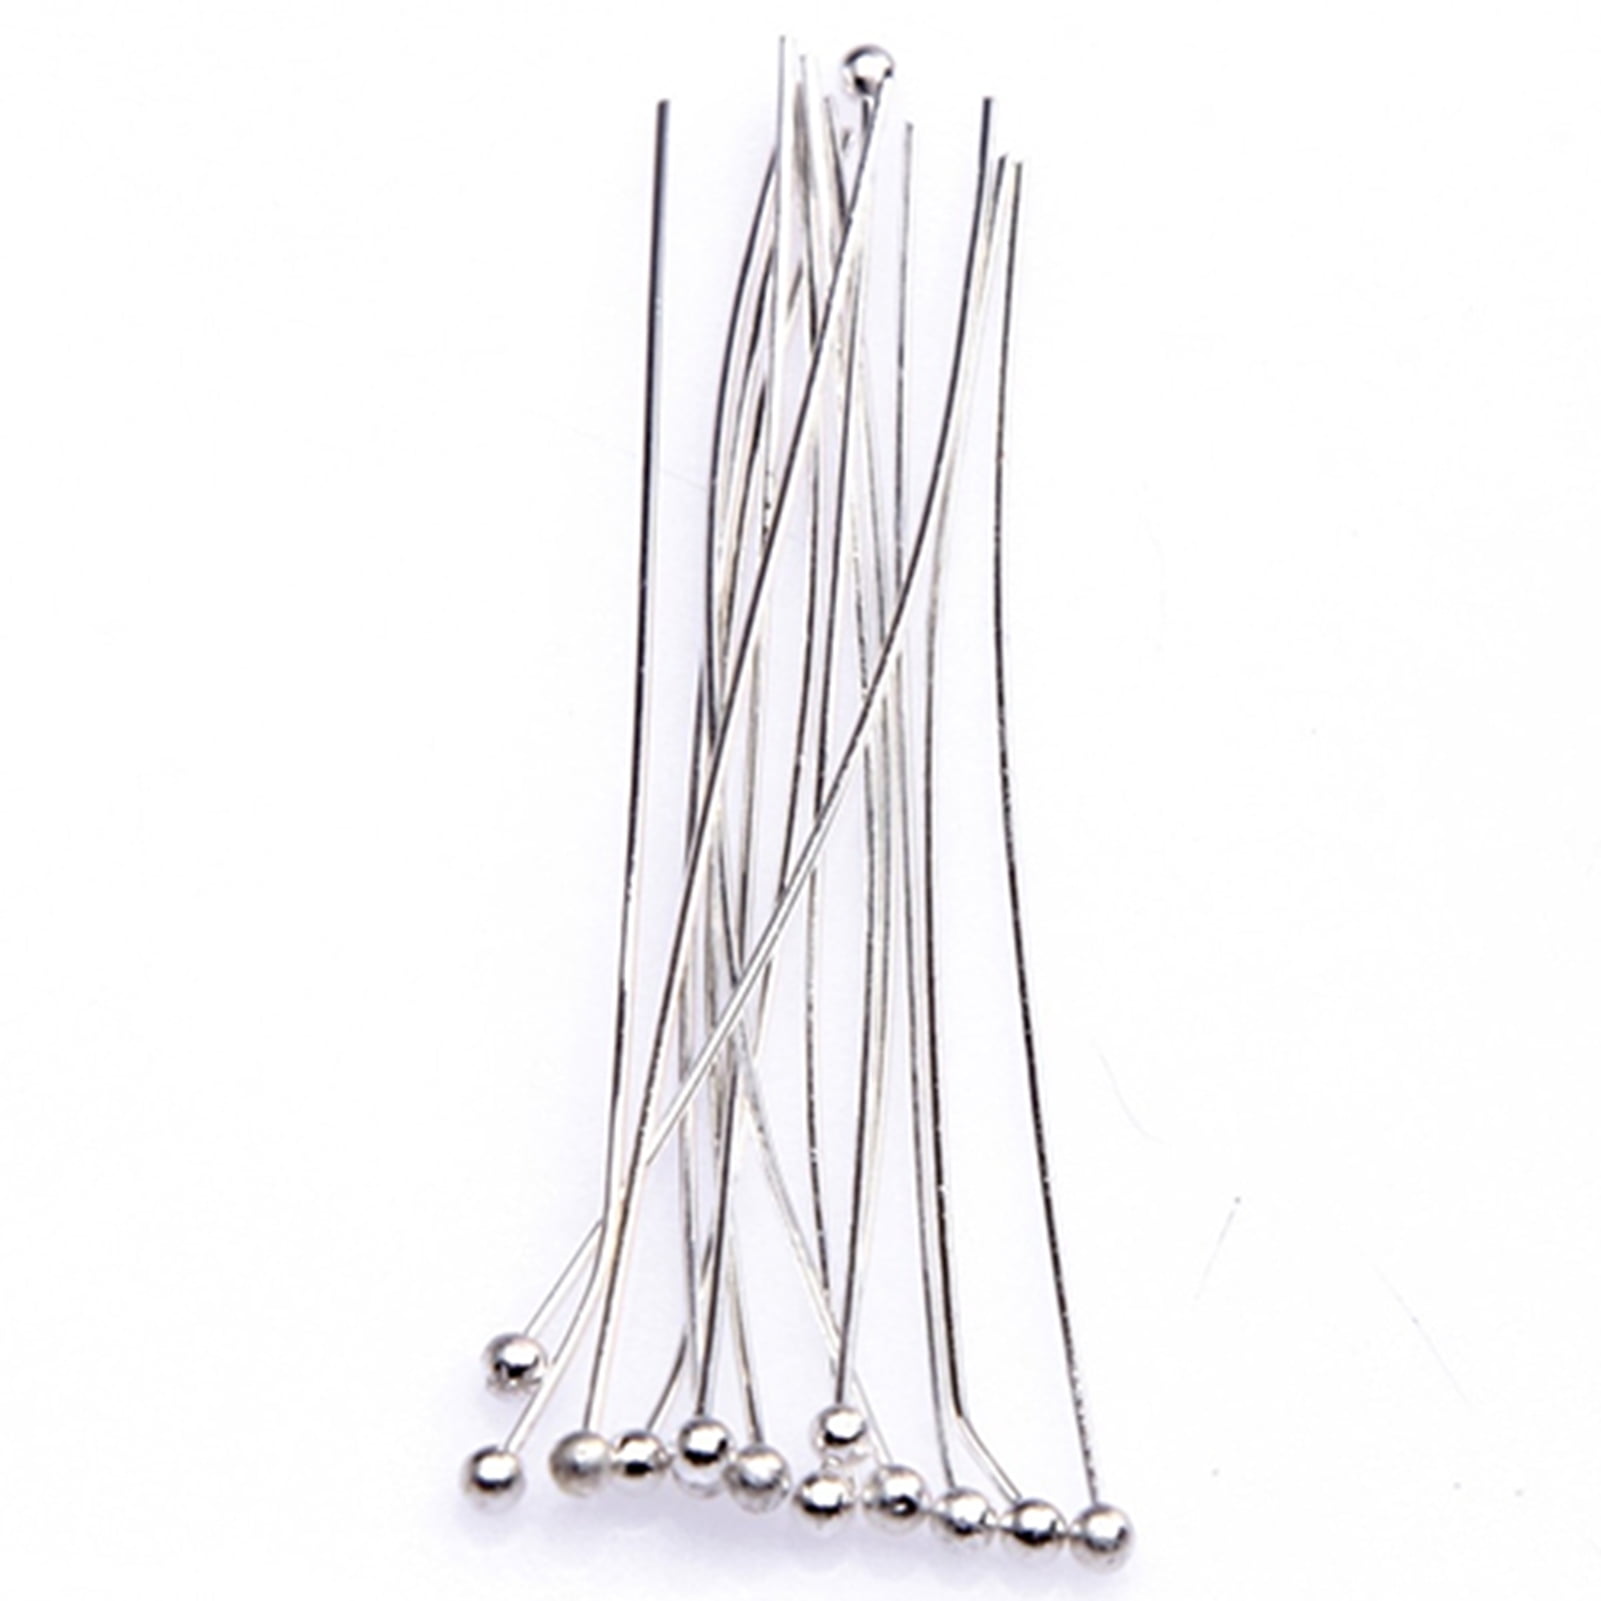 1/8" 100PCs Head Pins Stainless Steel Dull Silver Tone 4 mm